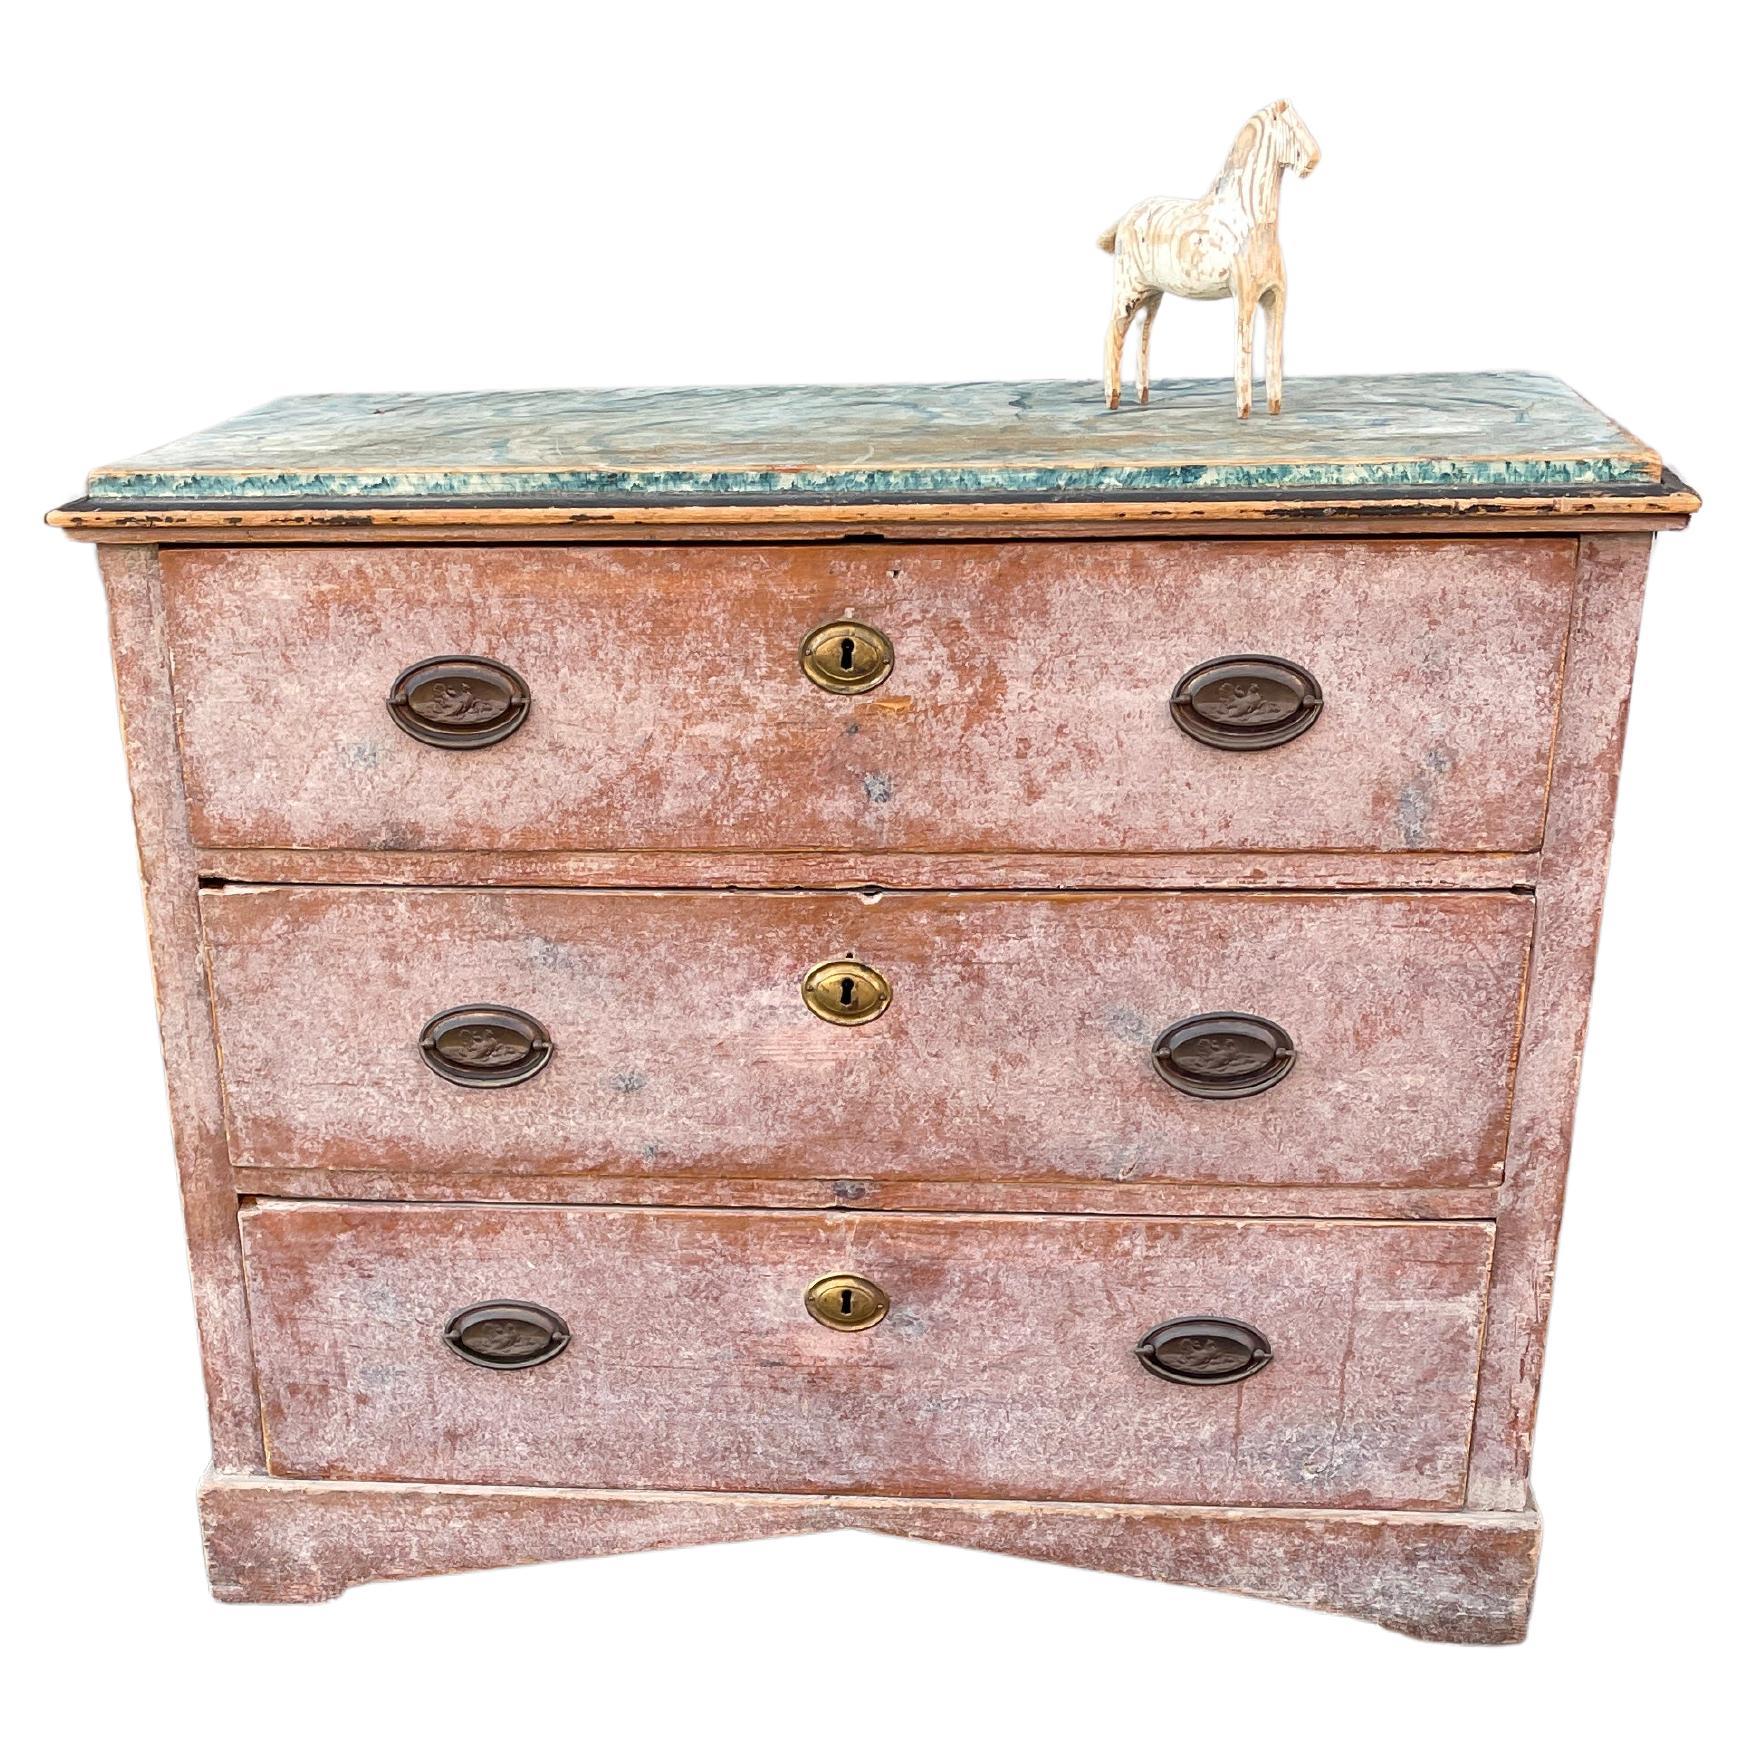 Early 19th Century Empire Chest with Painted Faux Marble Top For Sale